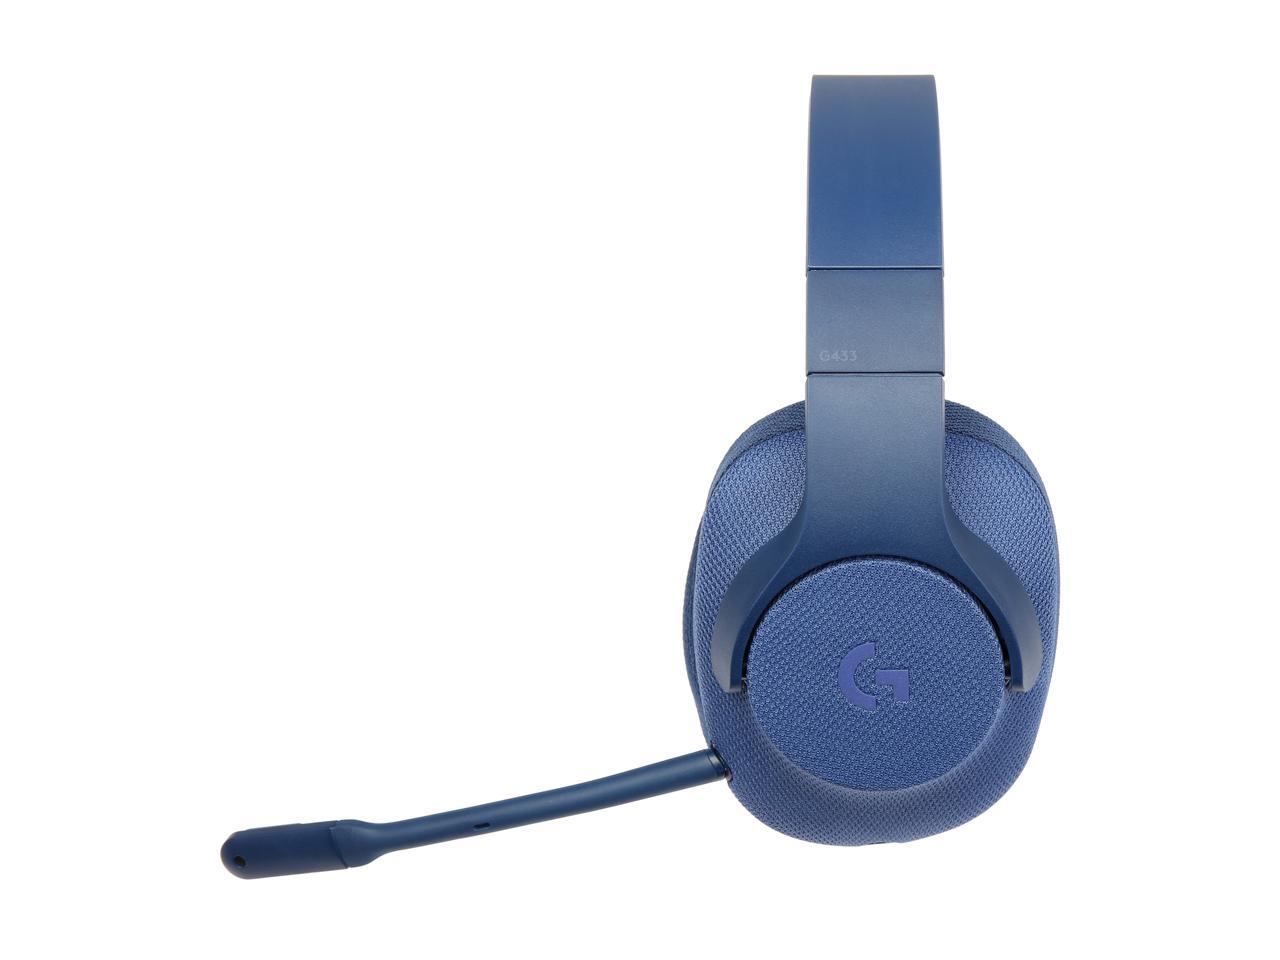 Logitech 981-000681 G433 7.1 Wired Gaming Headset with DTS Headphone: X 7.1 Surround for PC, PS4, PS4 PRO, Xbox One, Xbox One S, Nintendo Switch - Blue